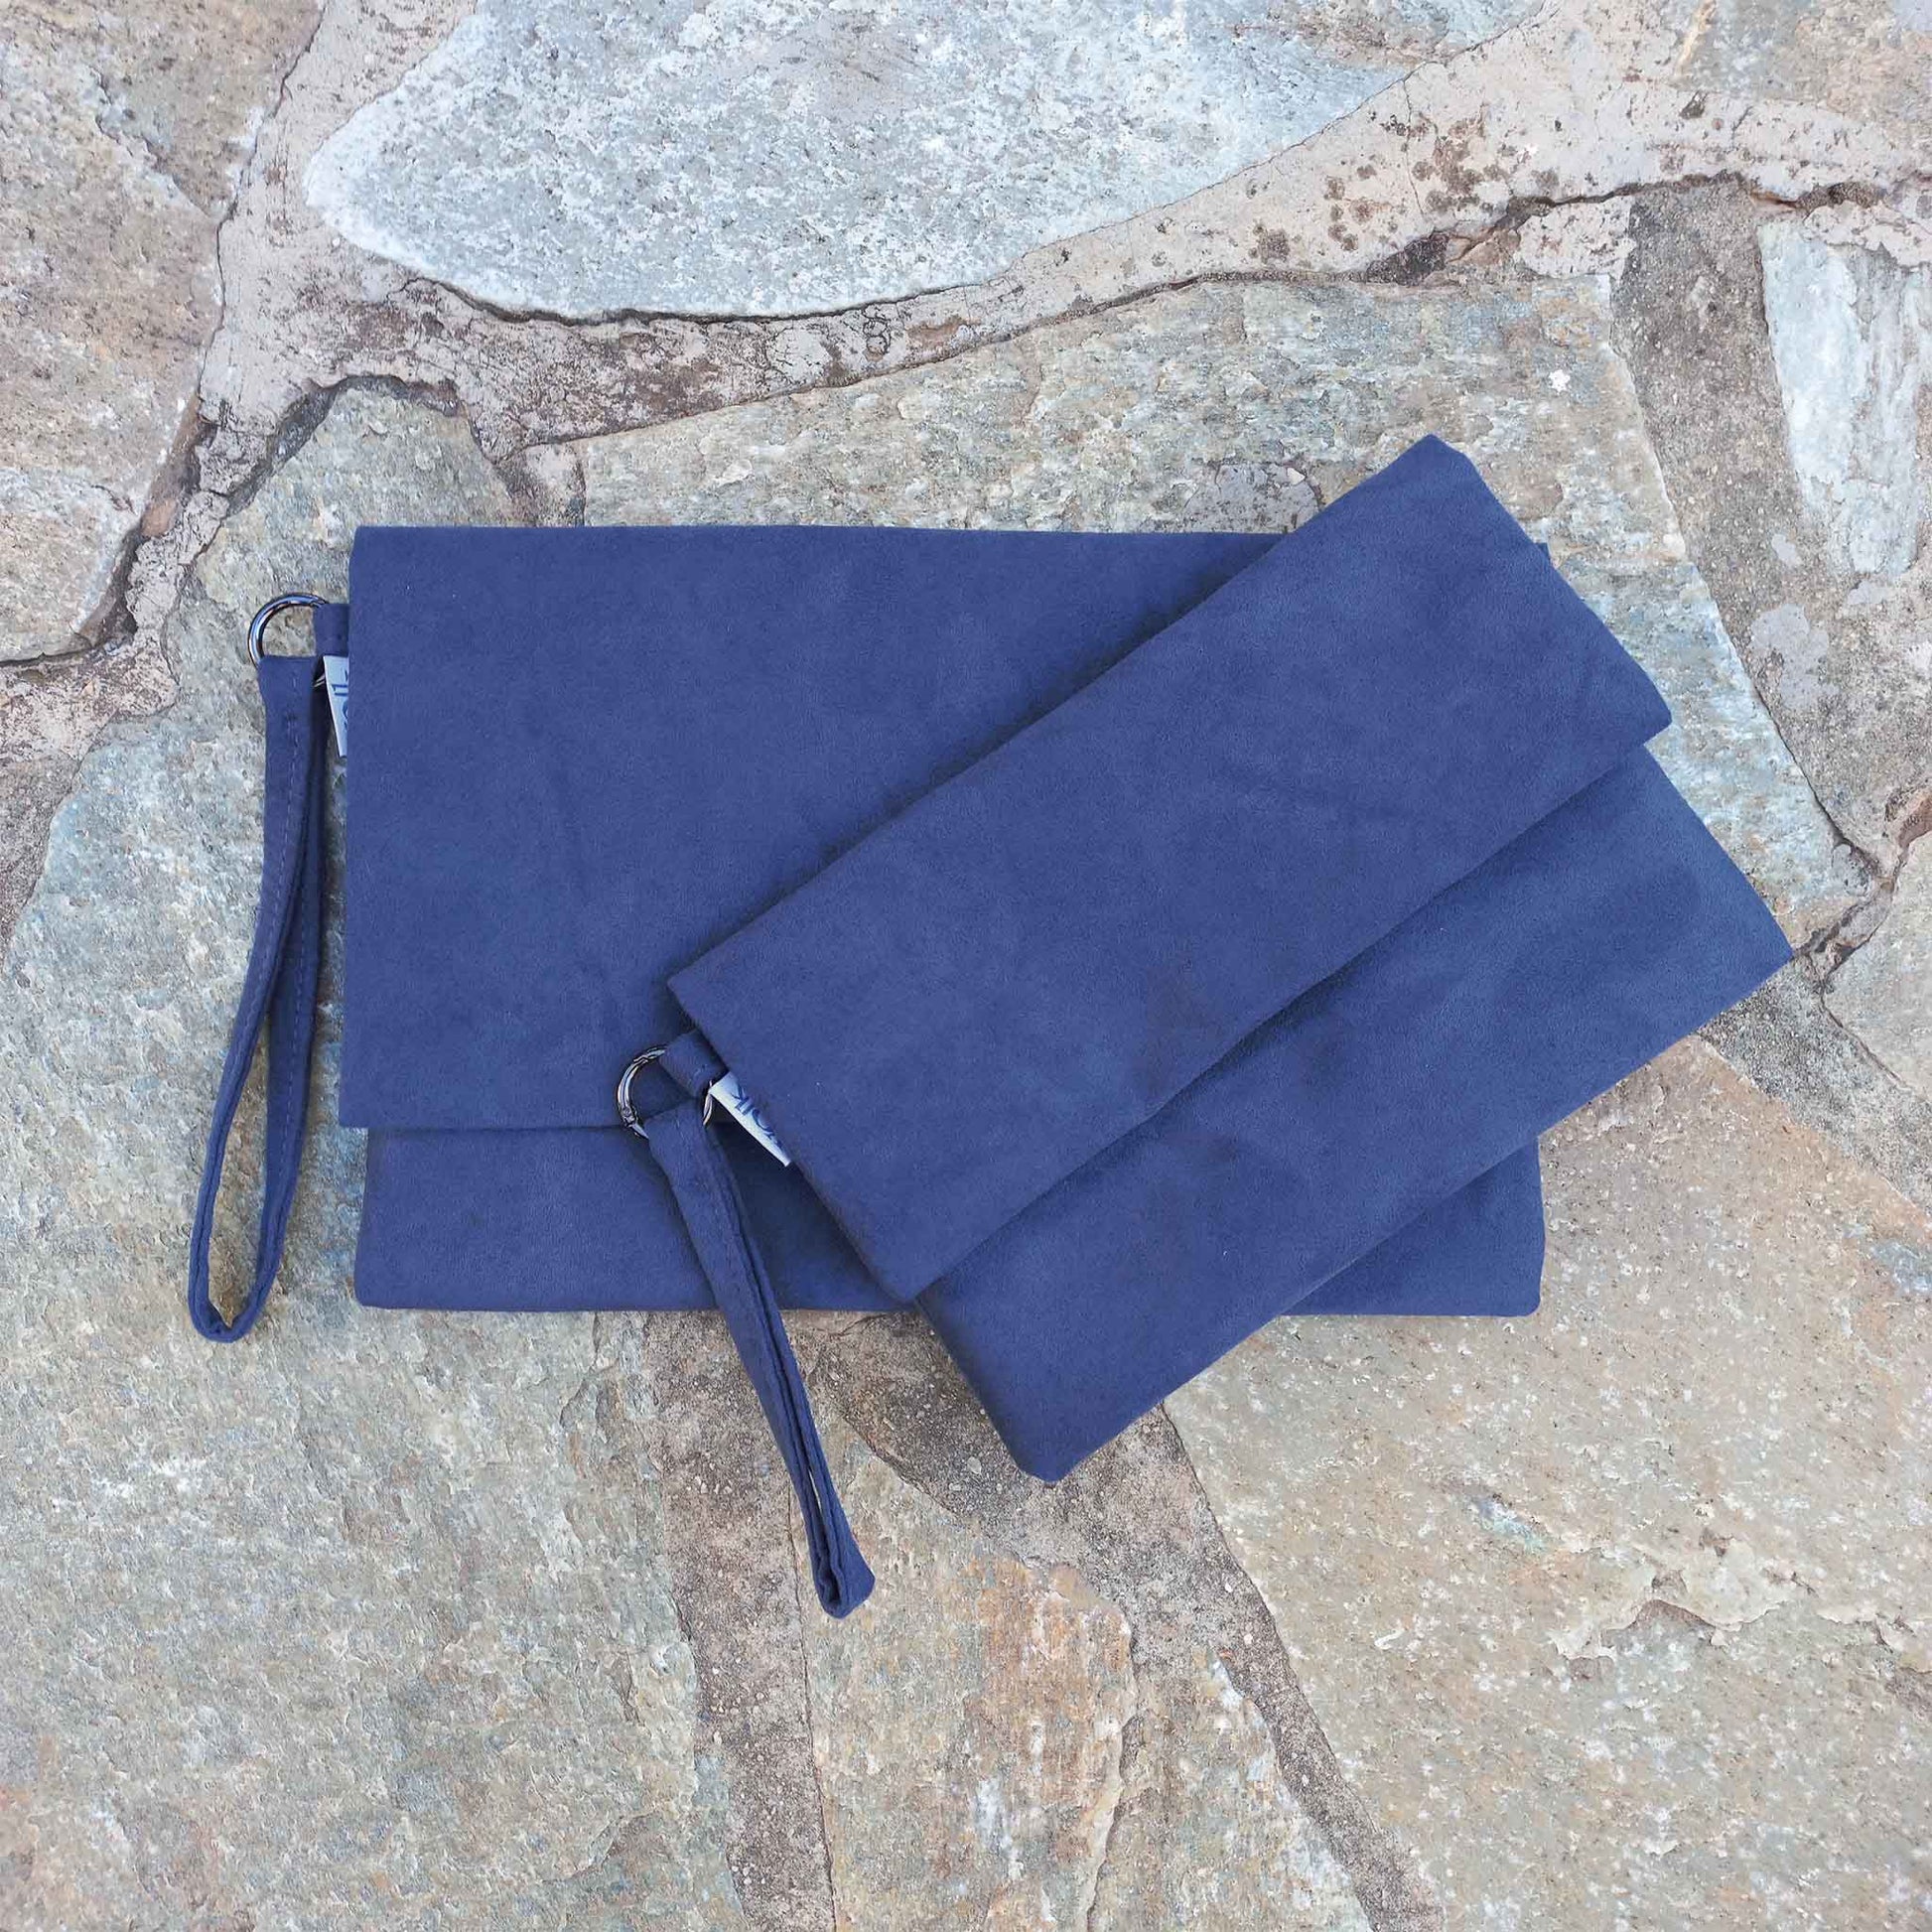 Two blue clutches on a stone floor